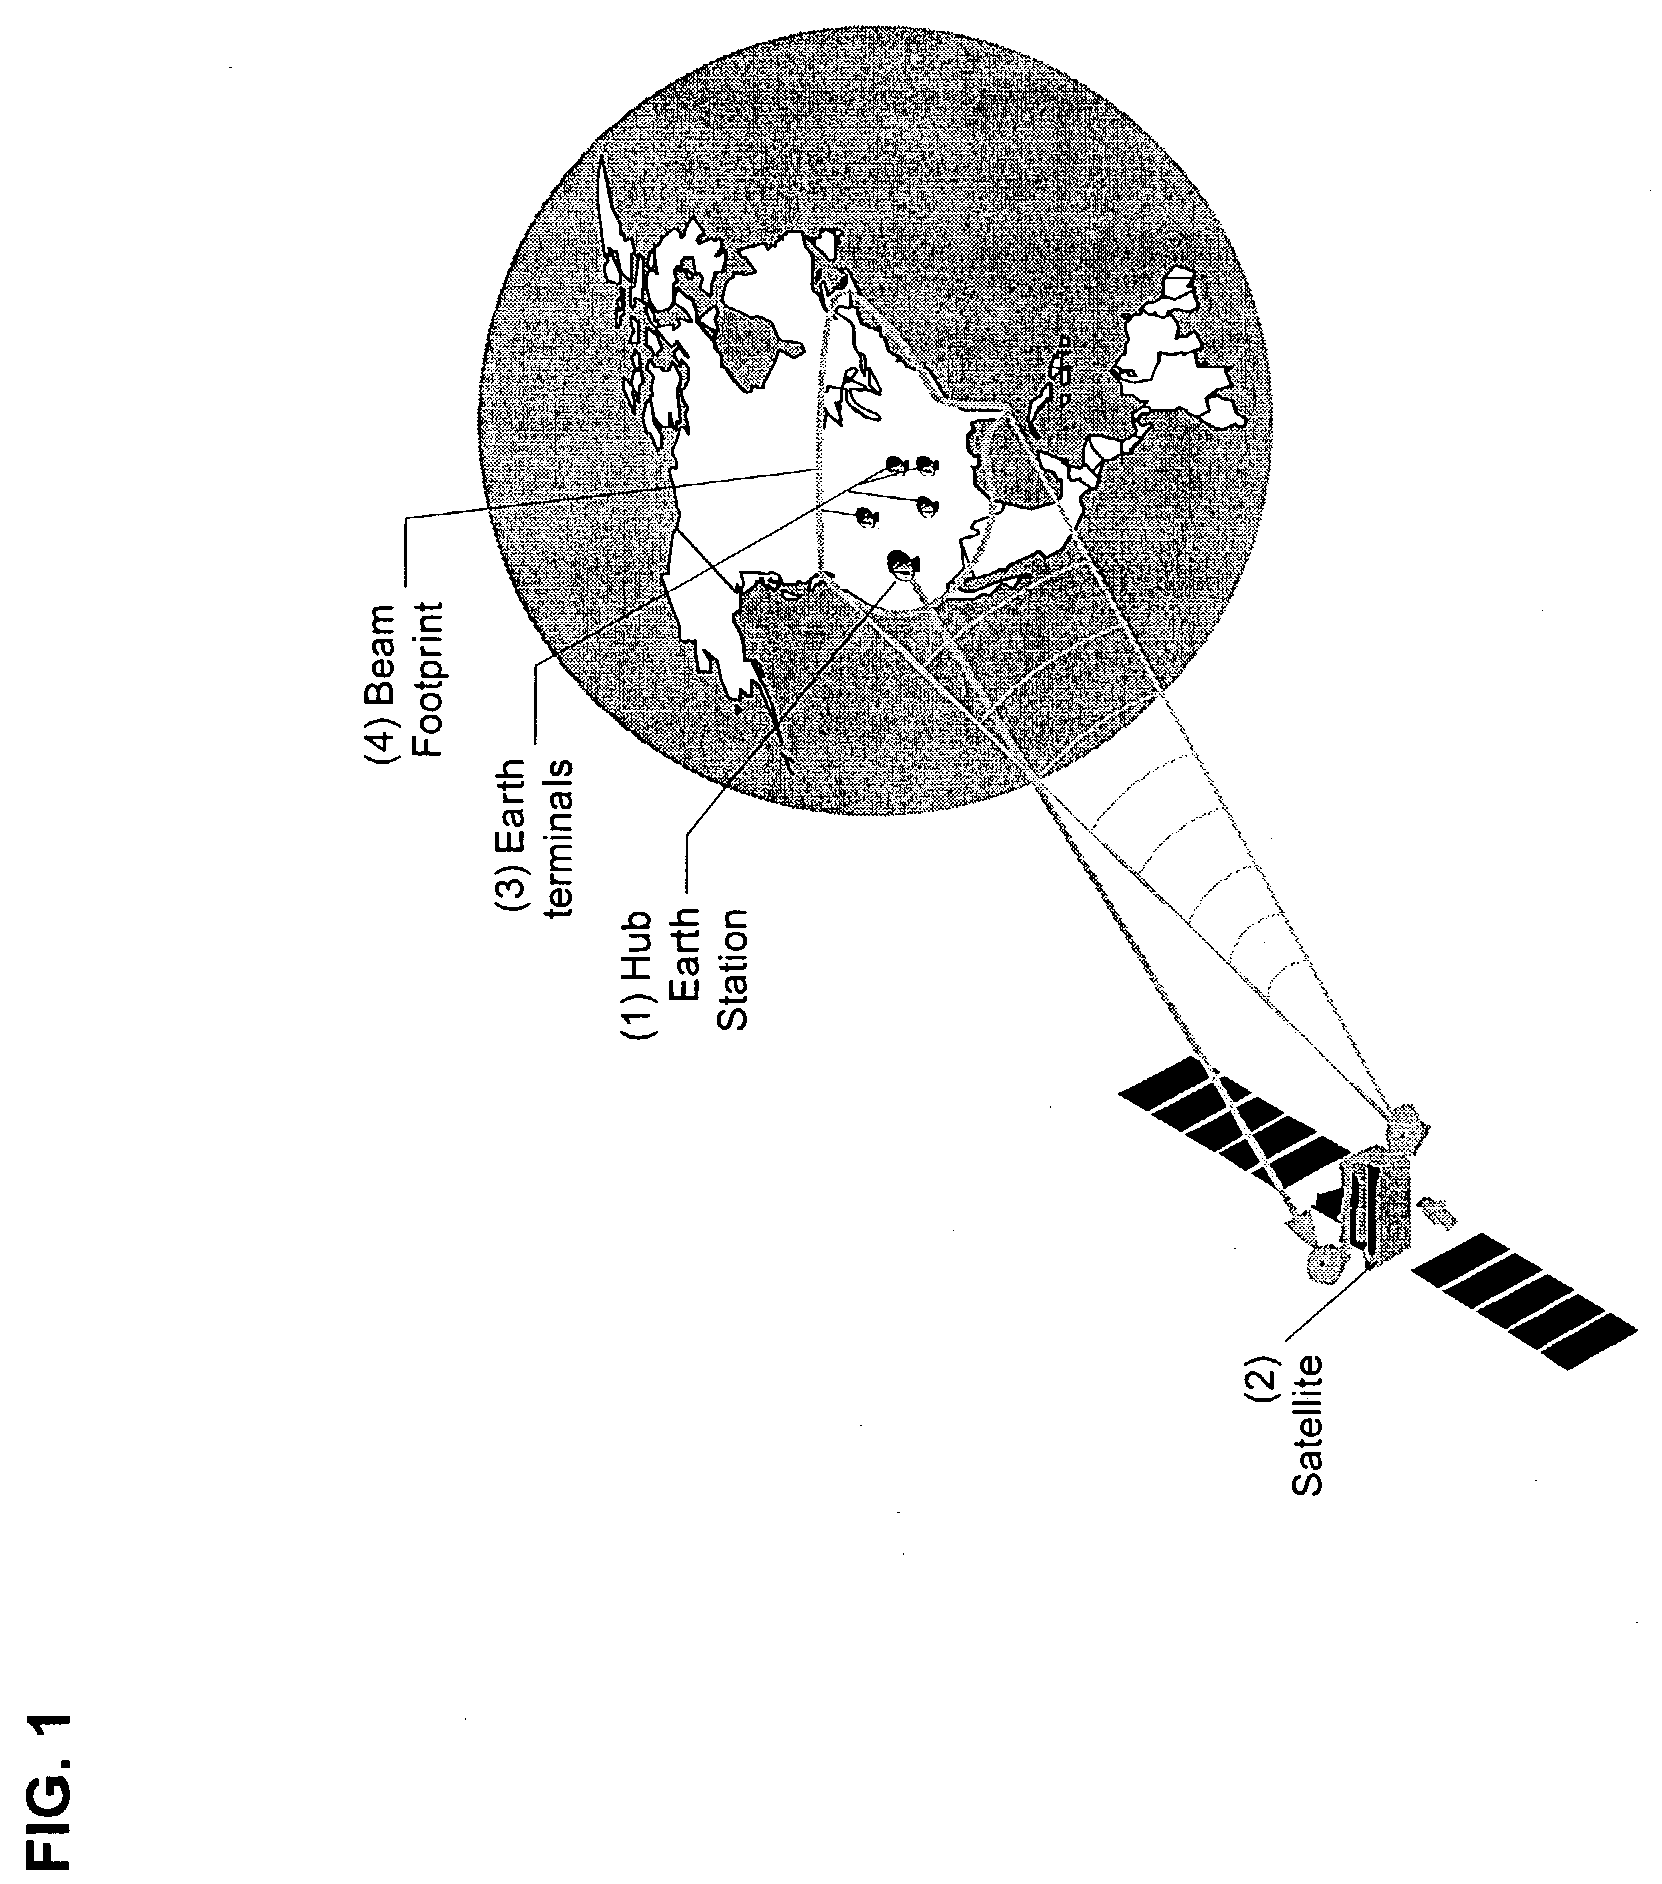 Wideband direct-to-home broadcasting satellite communications system and method